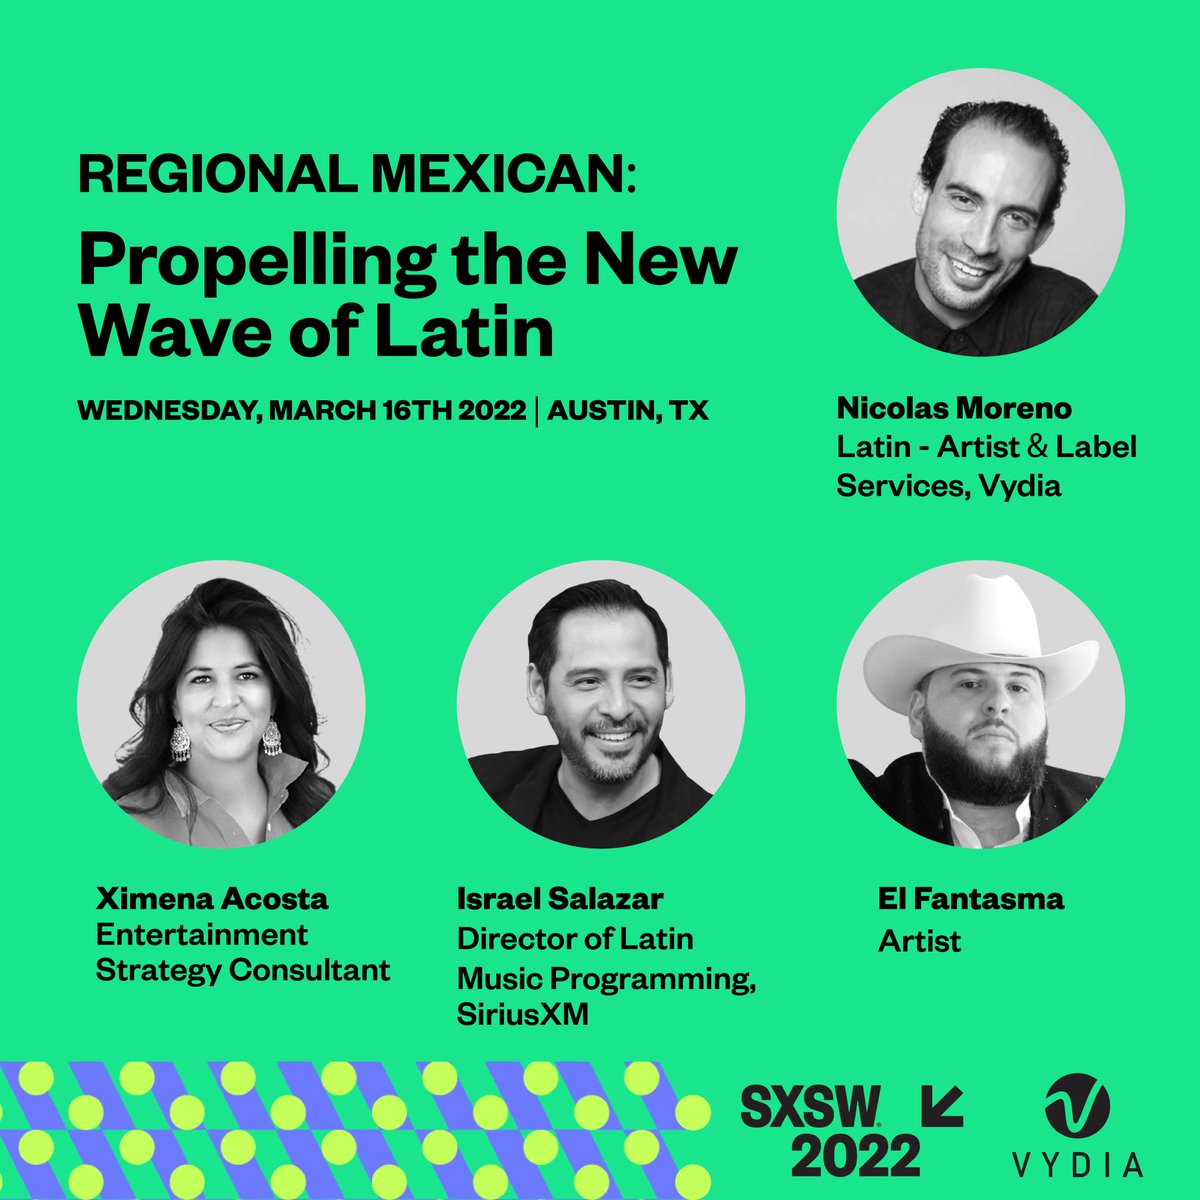 Join us at @sxsw 2022 for our panel 'Regional Mexican: Propelling the New Wave of Latin'. This riveting discussion will explore the impact and trajectory of the sub-genre, from the perspective of industry experts. #PoweredbyVydia #SXSW22

RSVP here: cart.sxsw.com/?_ga=2.1550361…